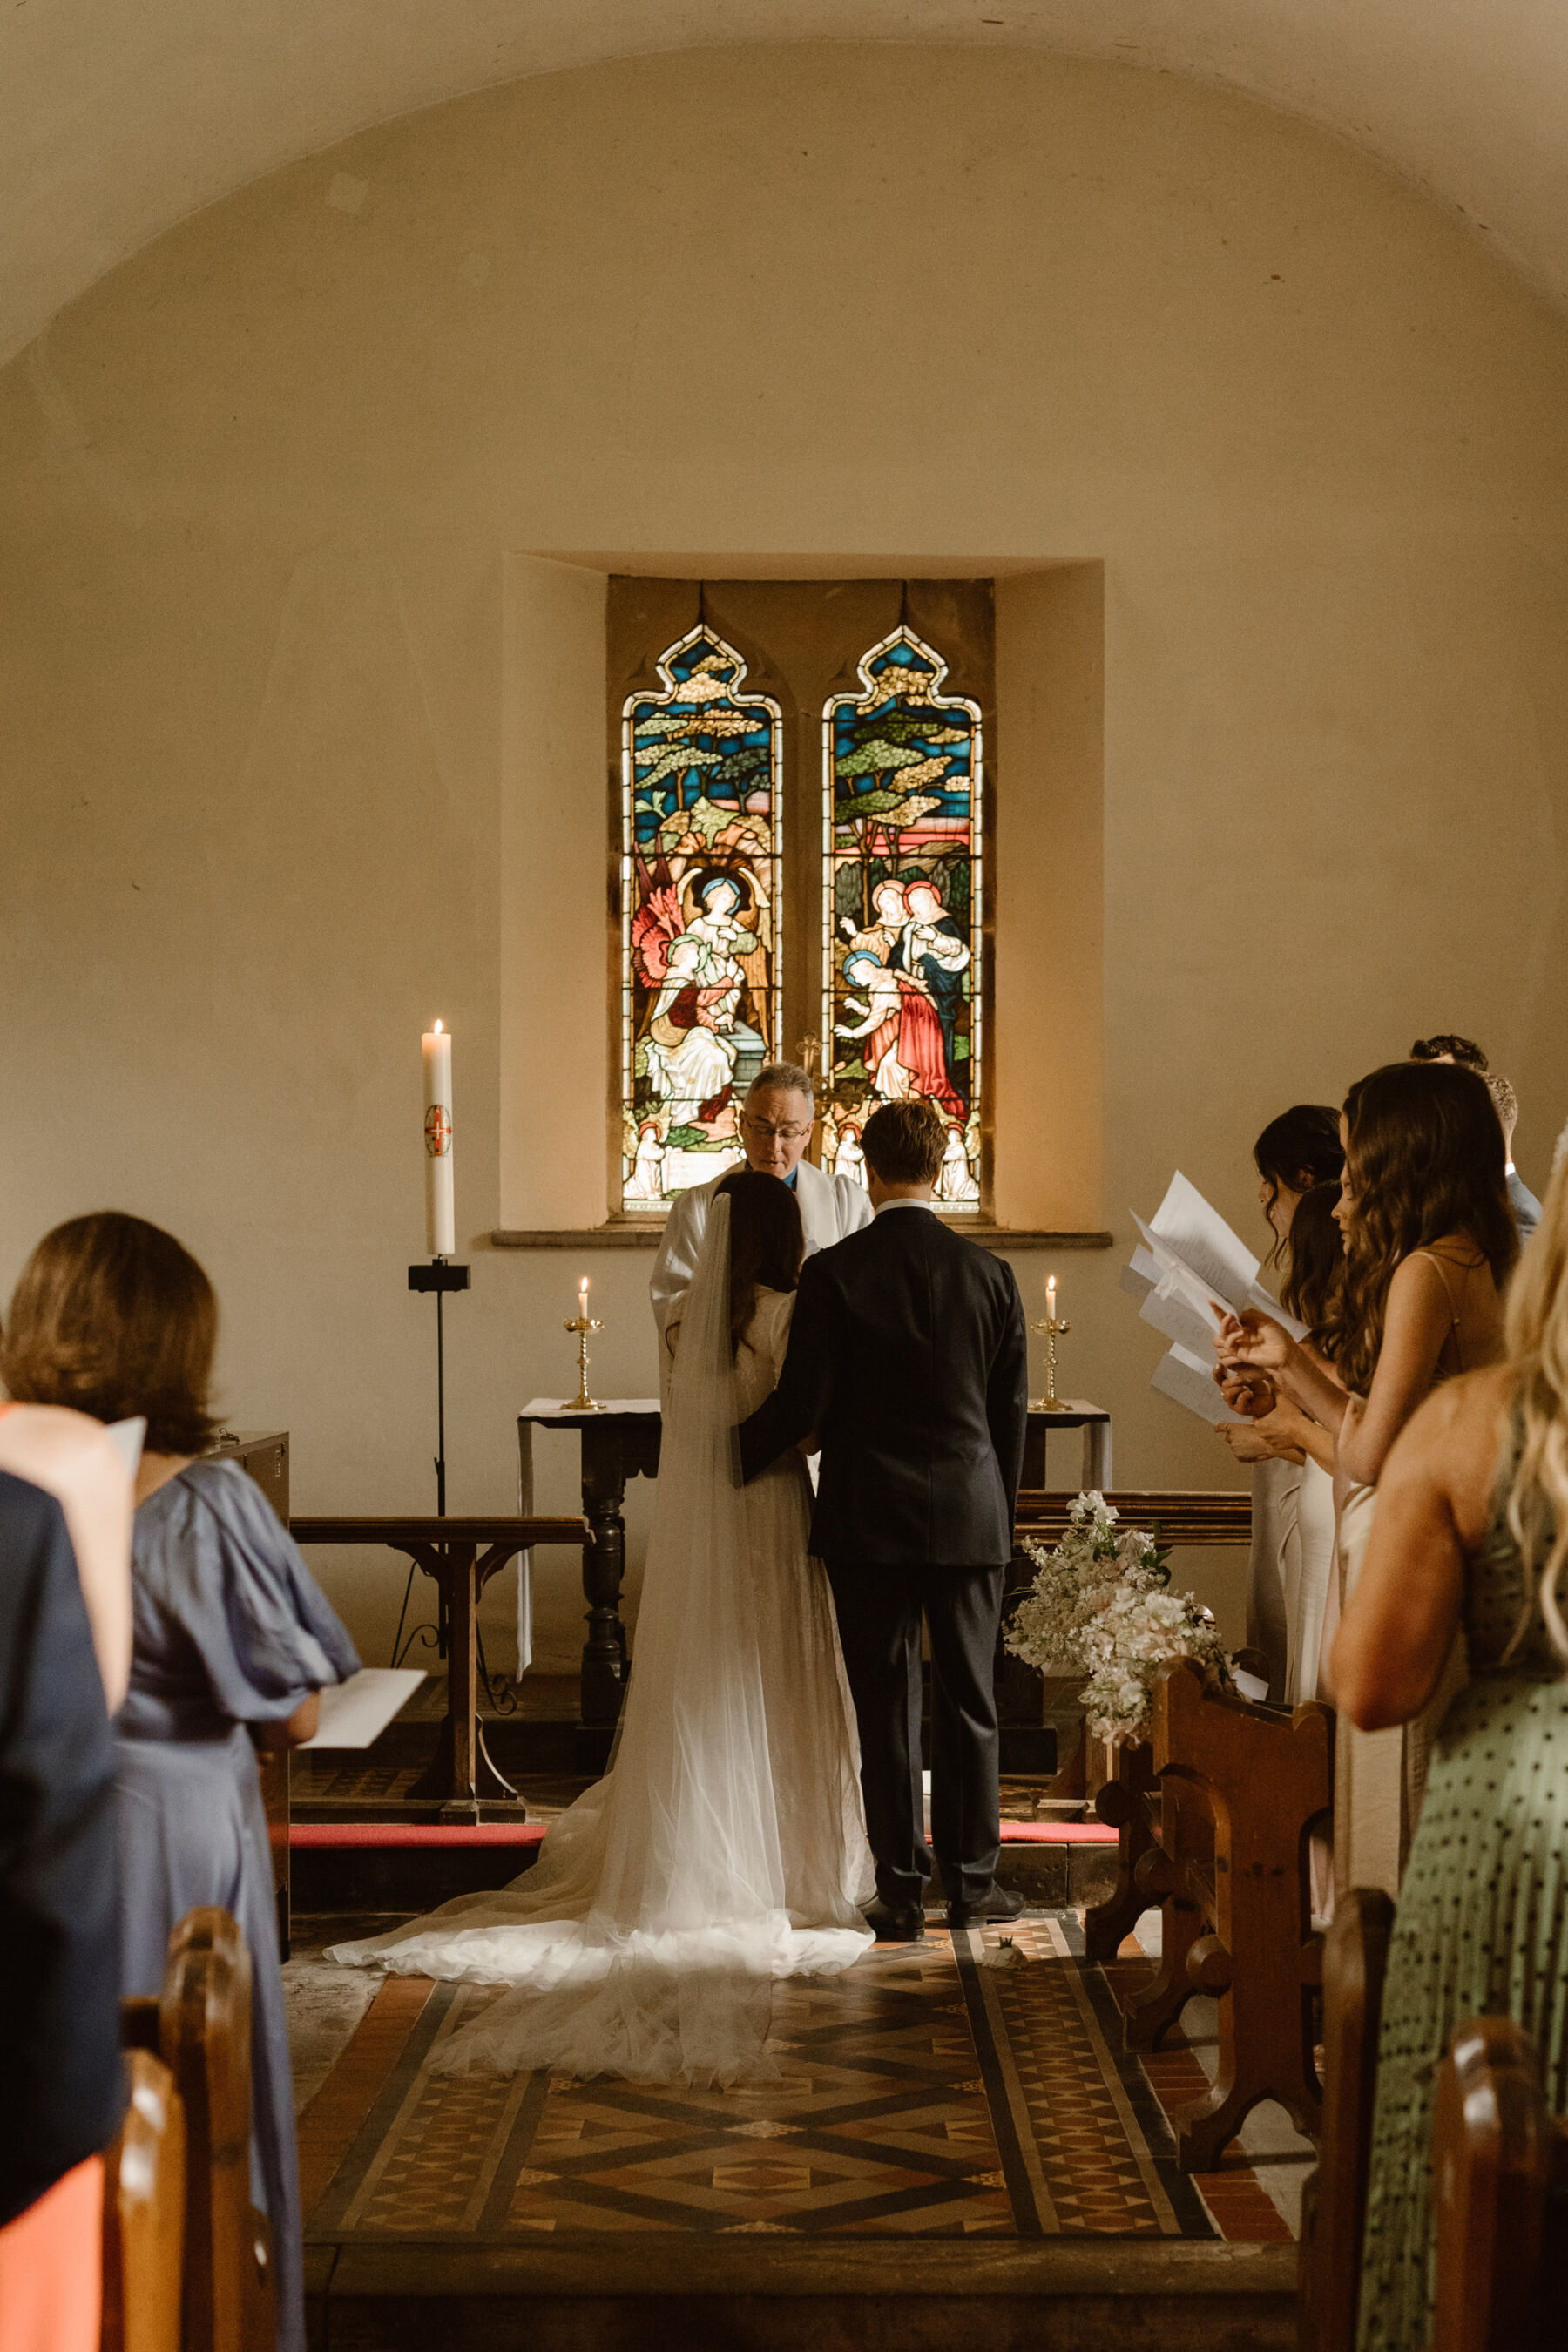 Wedding at Dewsall church, Herefordshire. Agnes Black Photography.